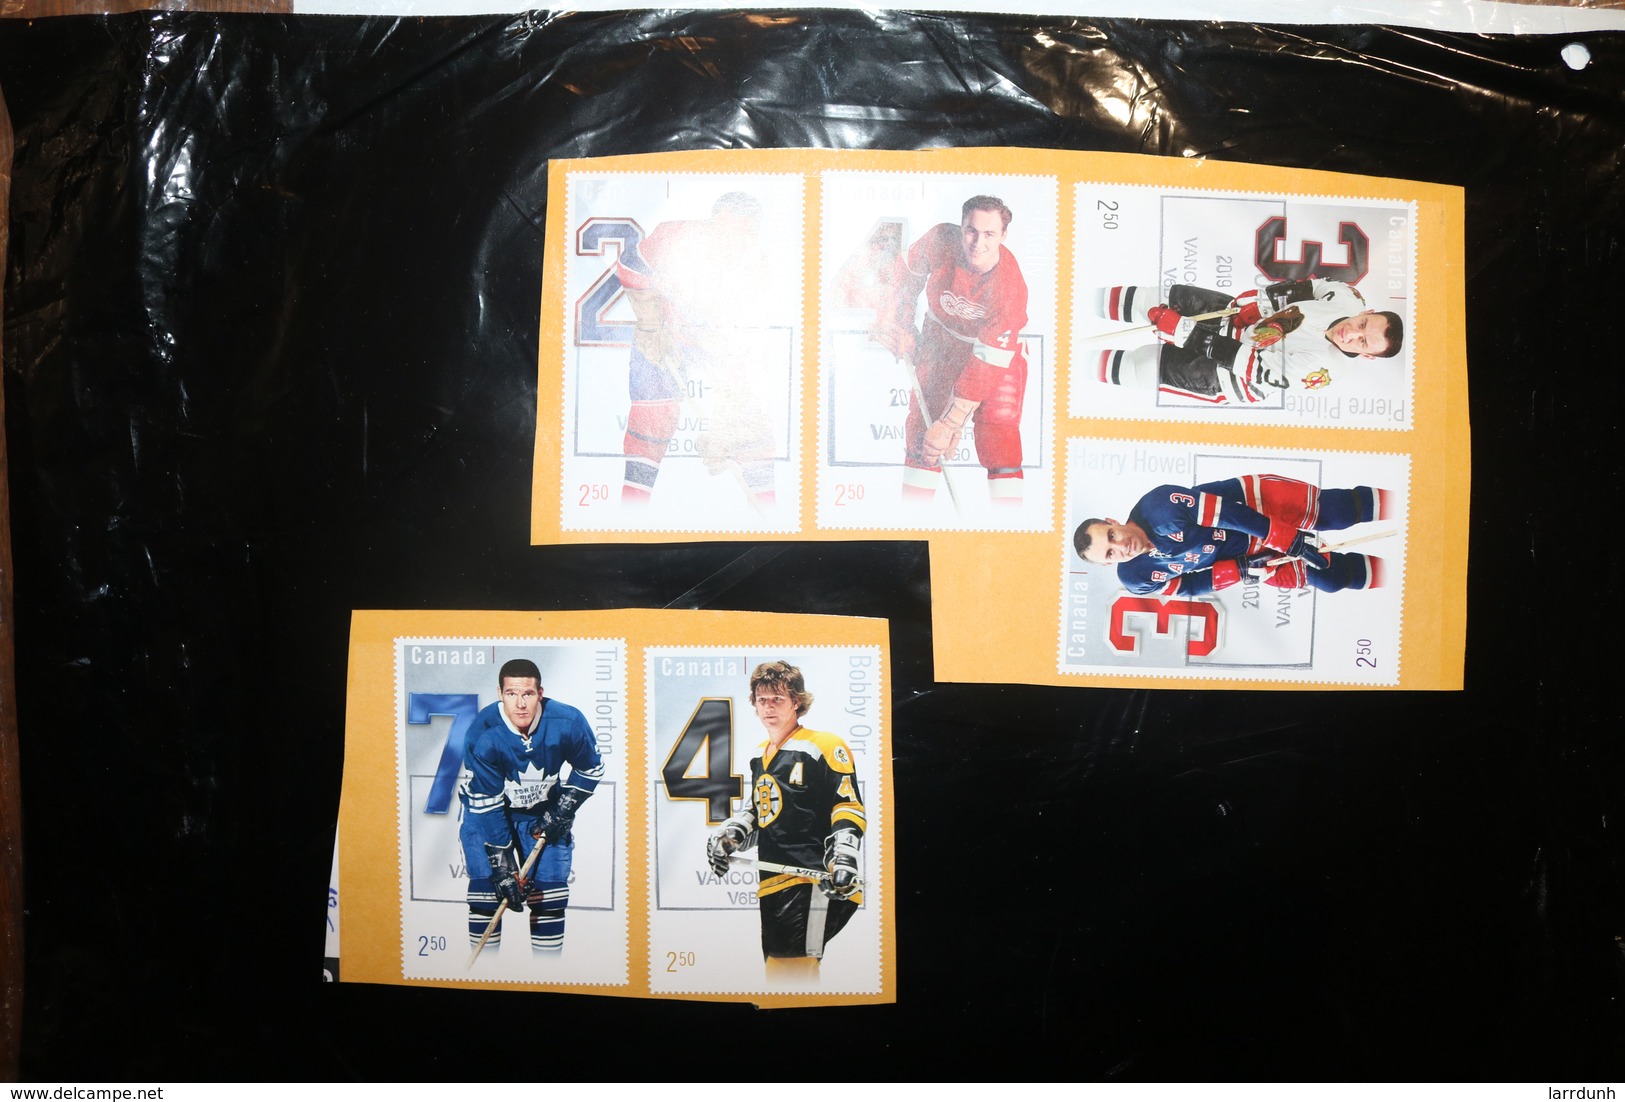 Canada NHL Legendary Defence Horton Harvey Pilote Orr Kelly Howell Six Large Stamps Cancelled On Piece MNH 2014 A04s - Full Sheets & Multiples